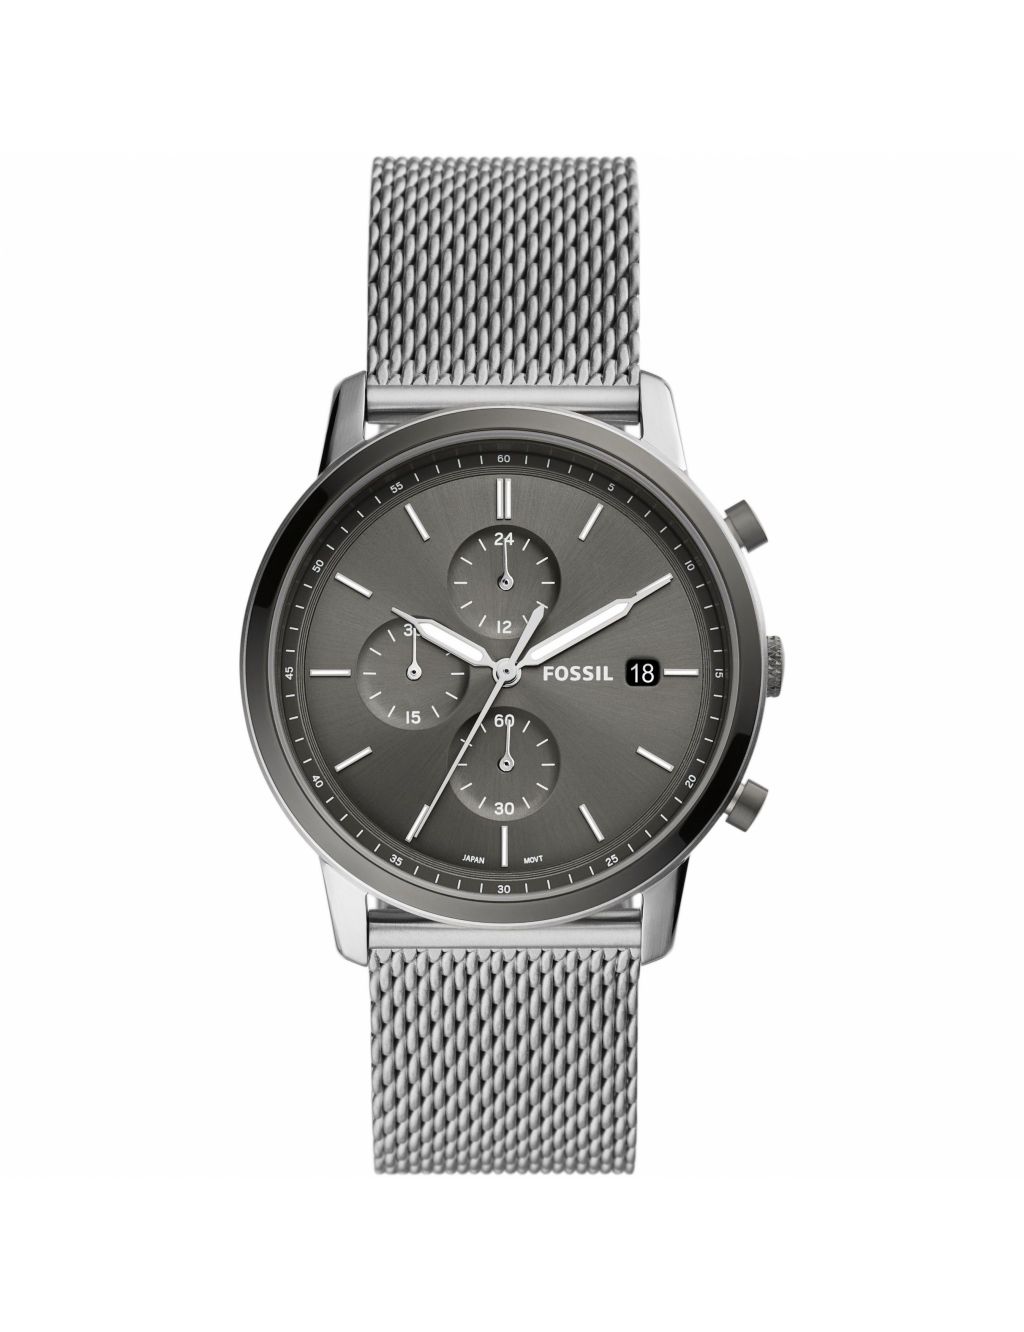 Fossil Minimalist Stainless Steel Watch image 1